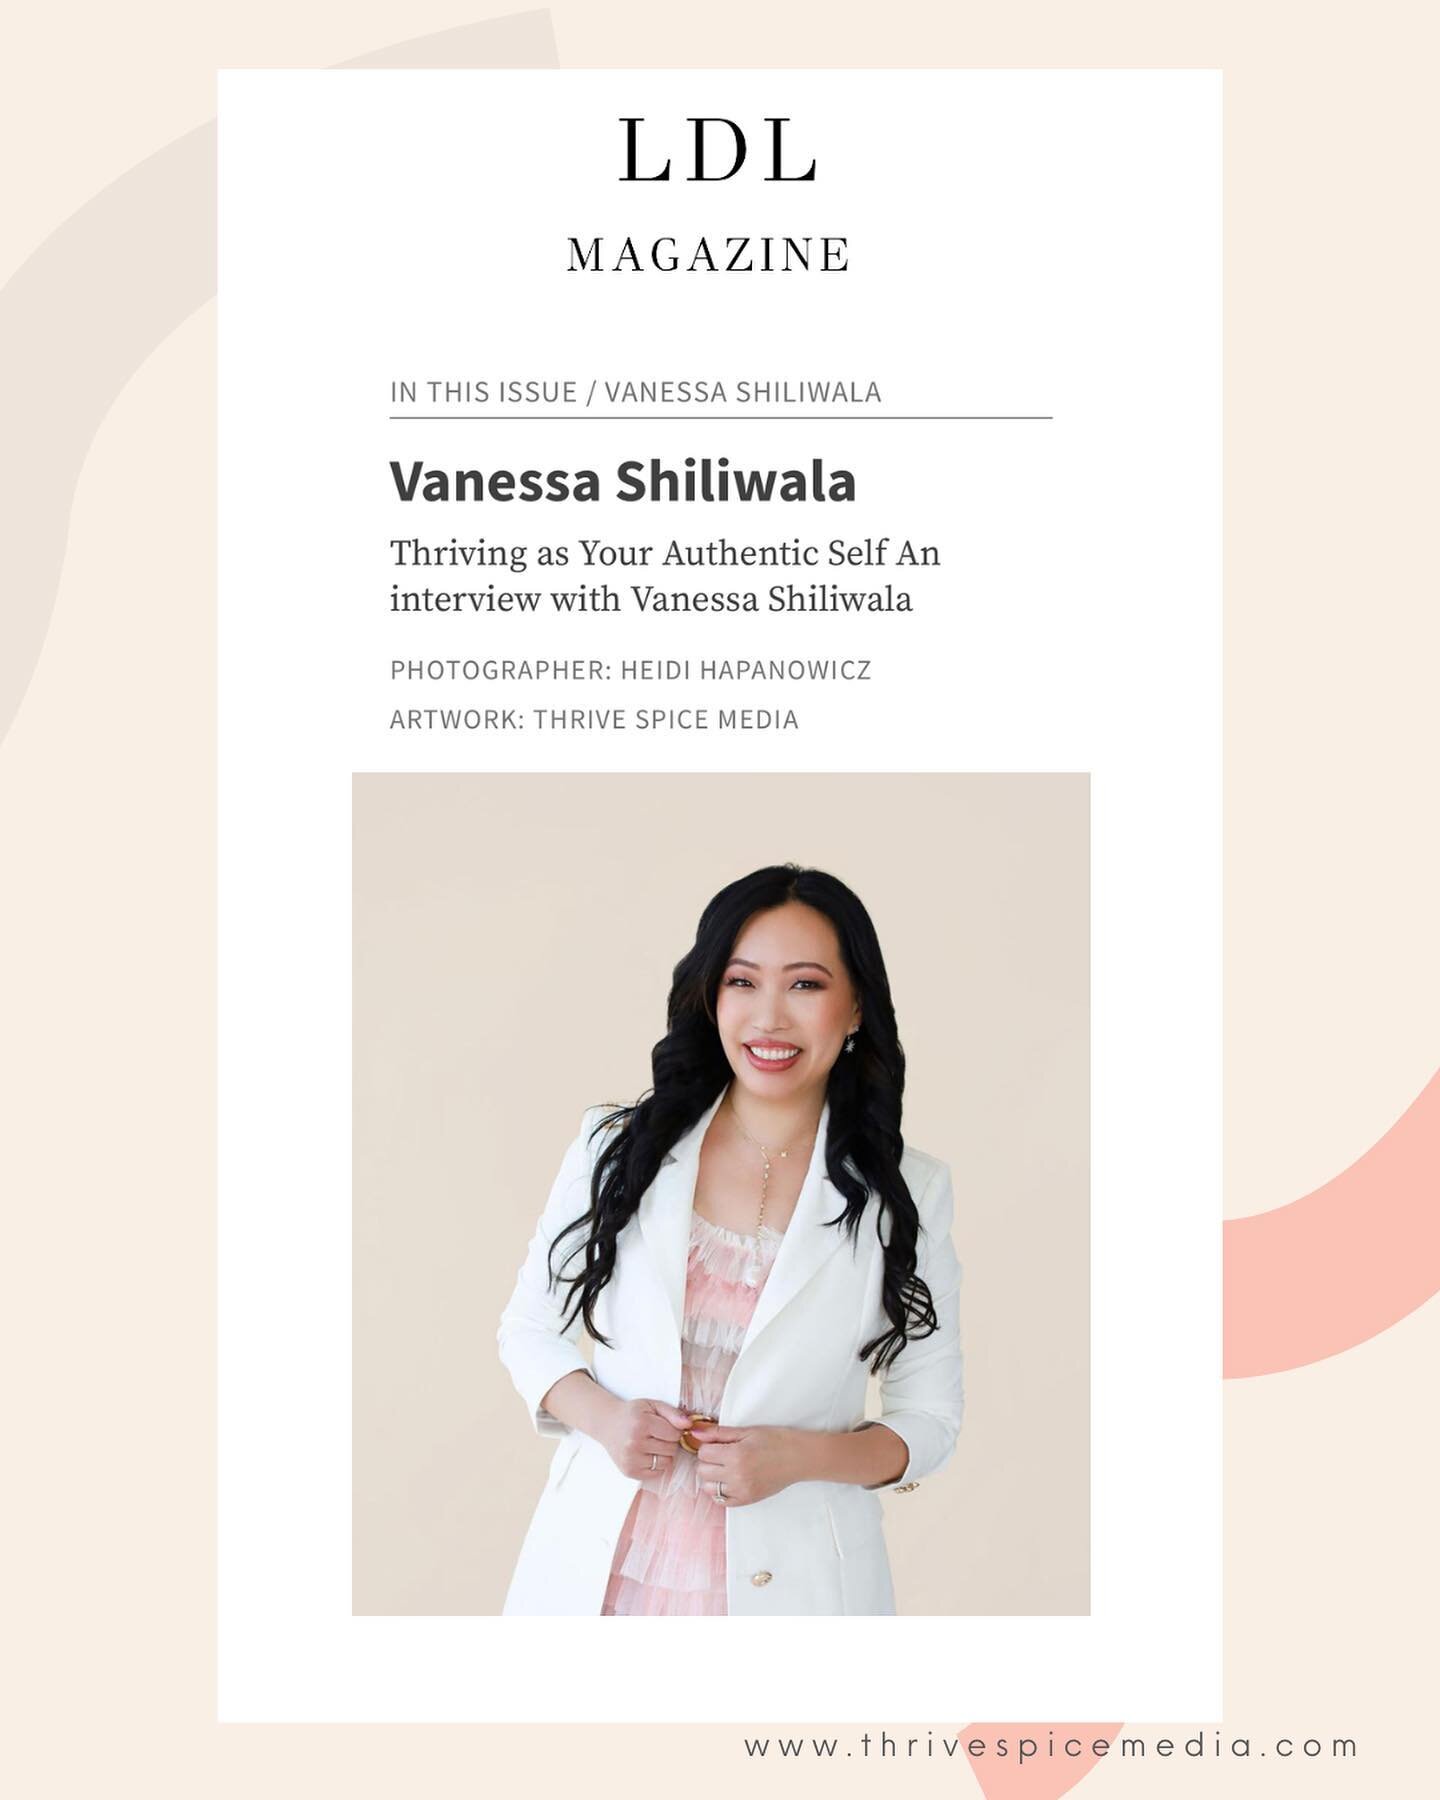 Honored to be featured alongside other AAPI trailblazers in the latest issue of @ldlmagazine! I especially appreciate that my story was covered by the editor-in-chief, Le&rsquo;Marqunita Lowe, in a magazine that amplifies Black stories and voices. We